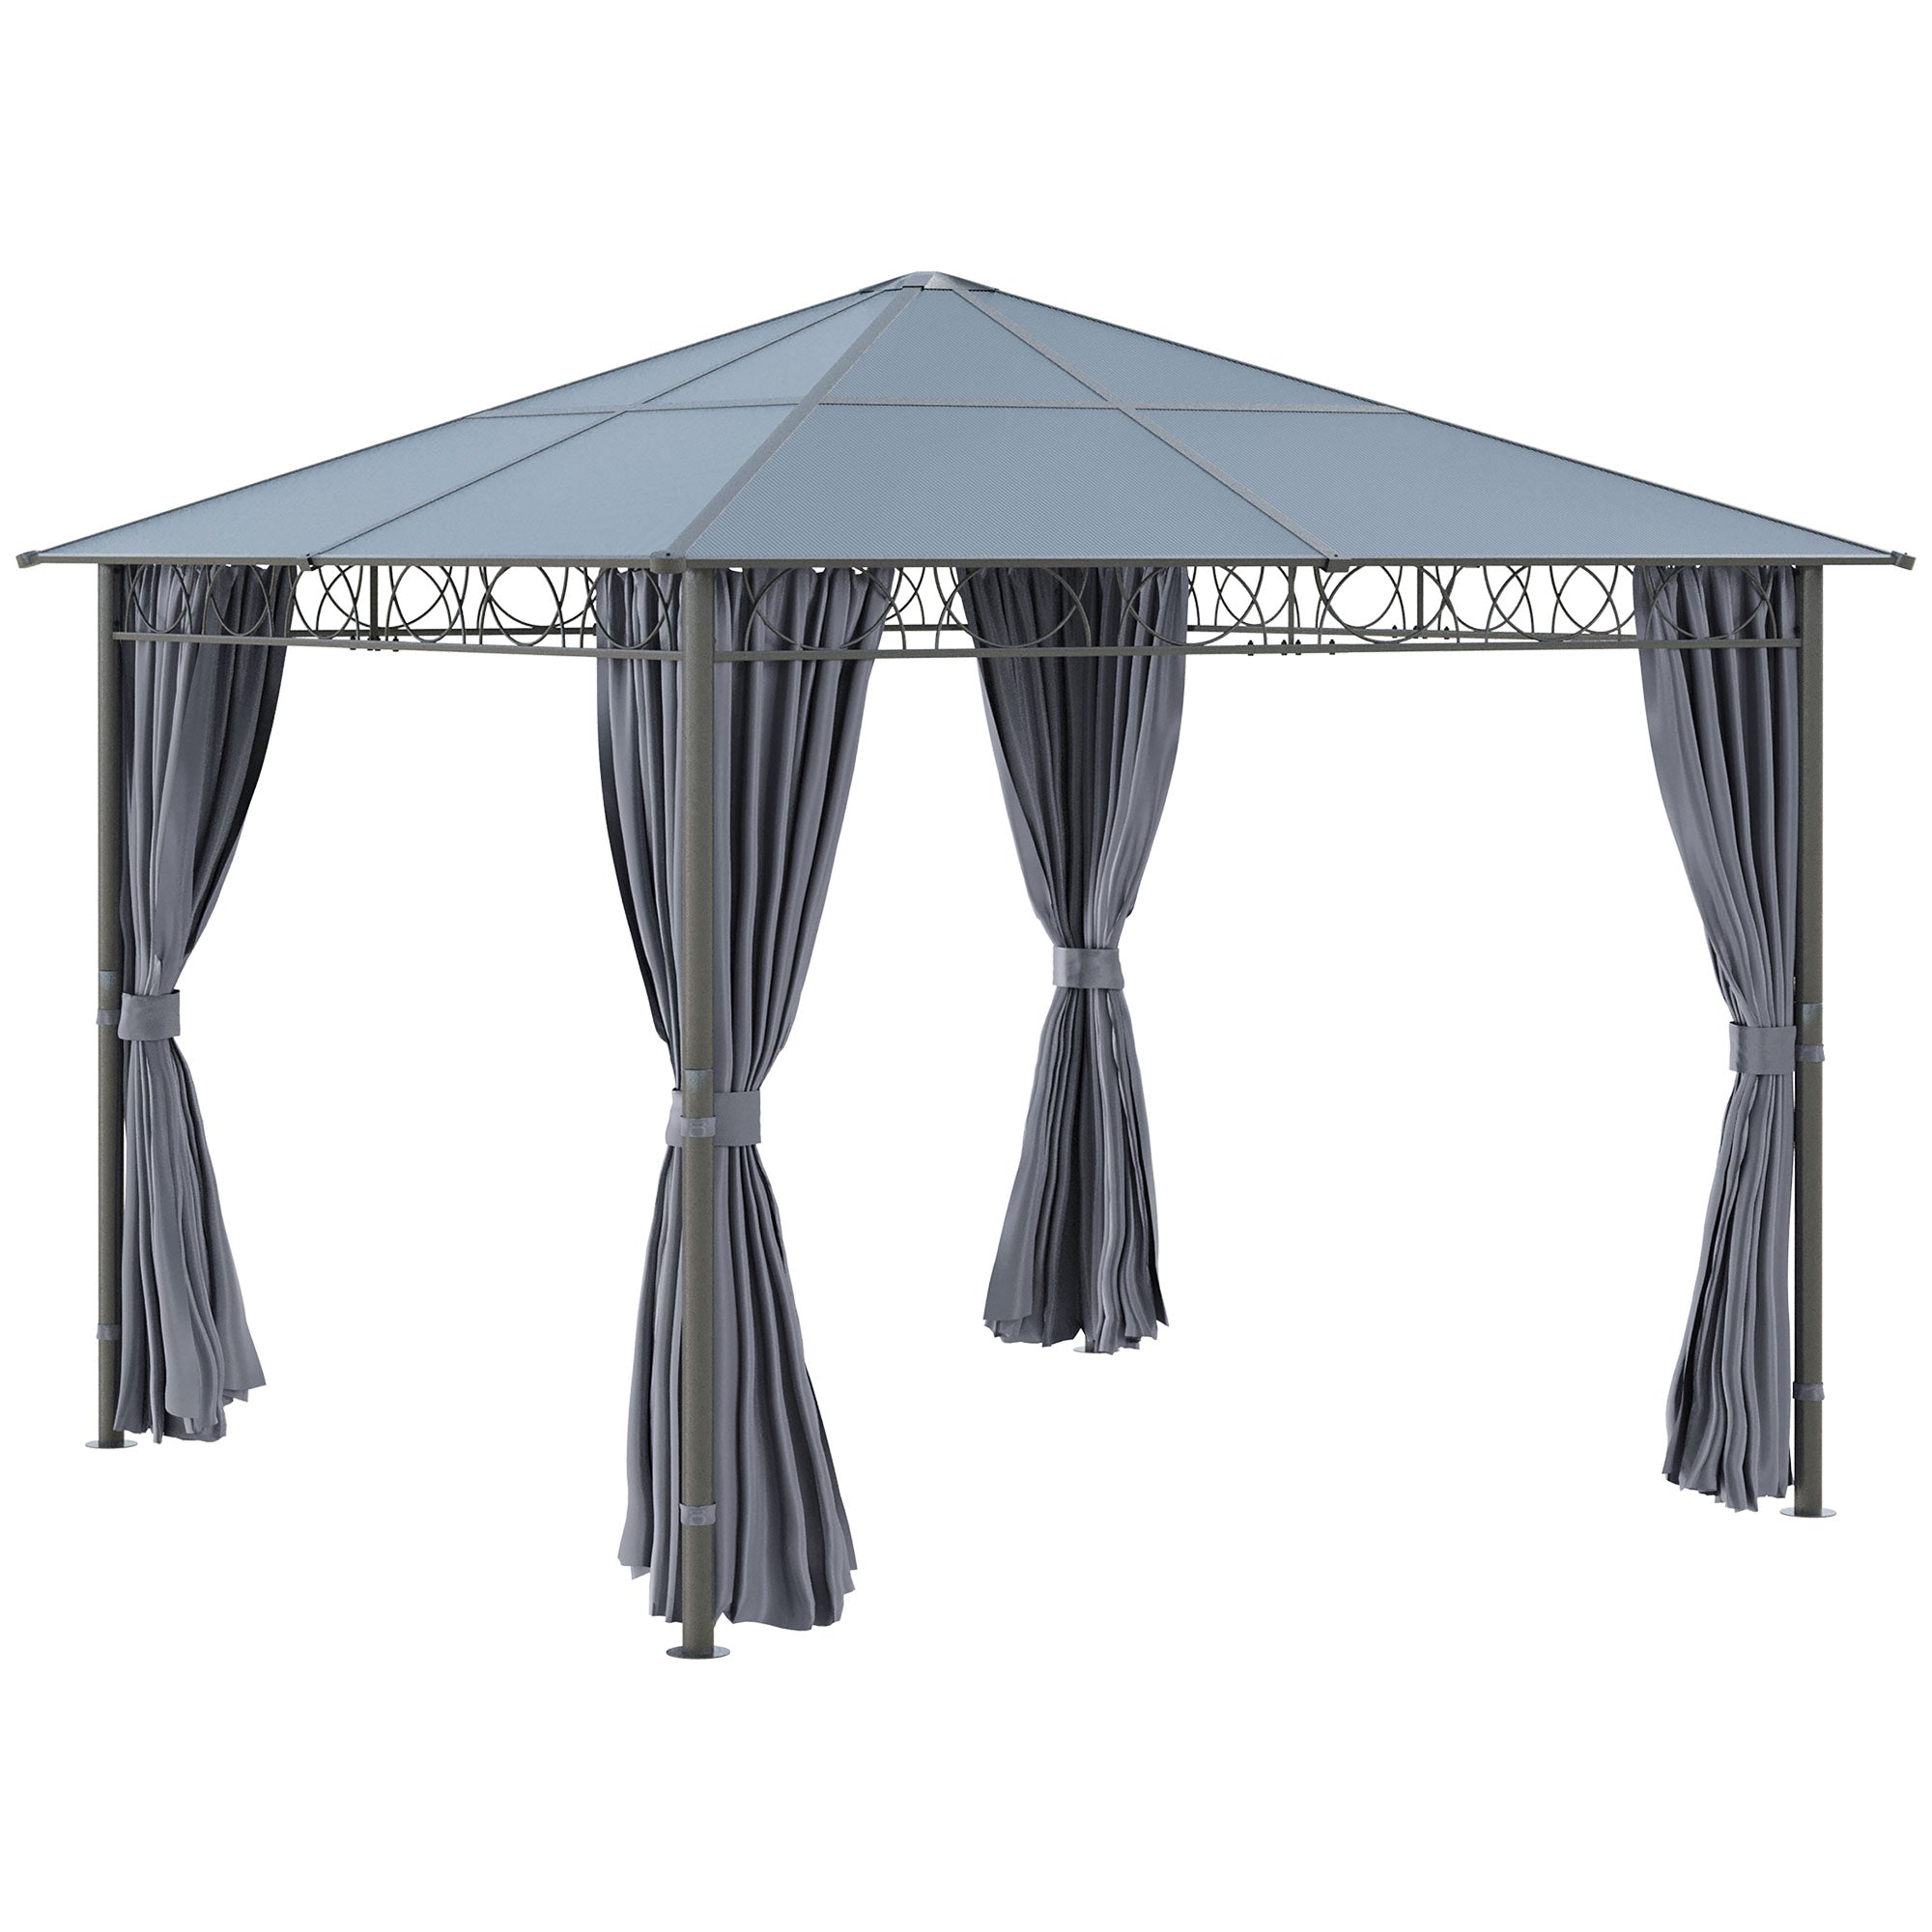 3 x 3(m) Hardtop Gazebo with UV Resistant Polycarbonate Roof, Steel & Aluminum Frame, Garden Pavilion with Curtains, Grey-0